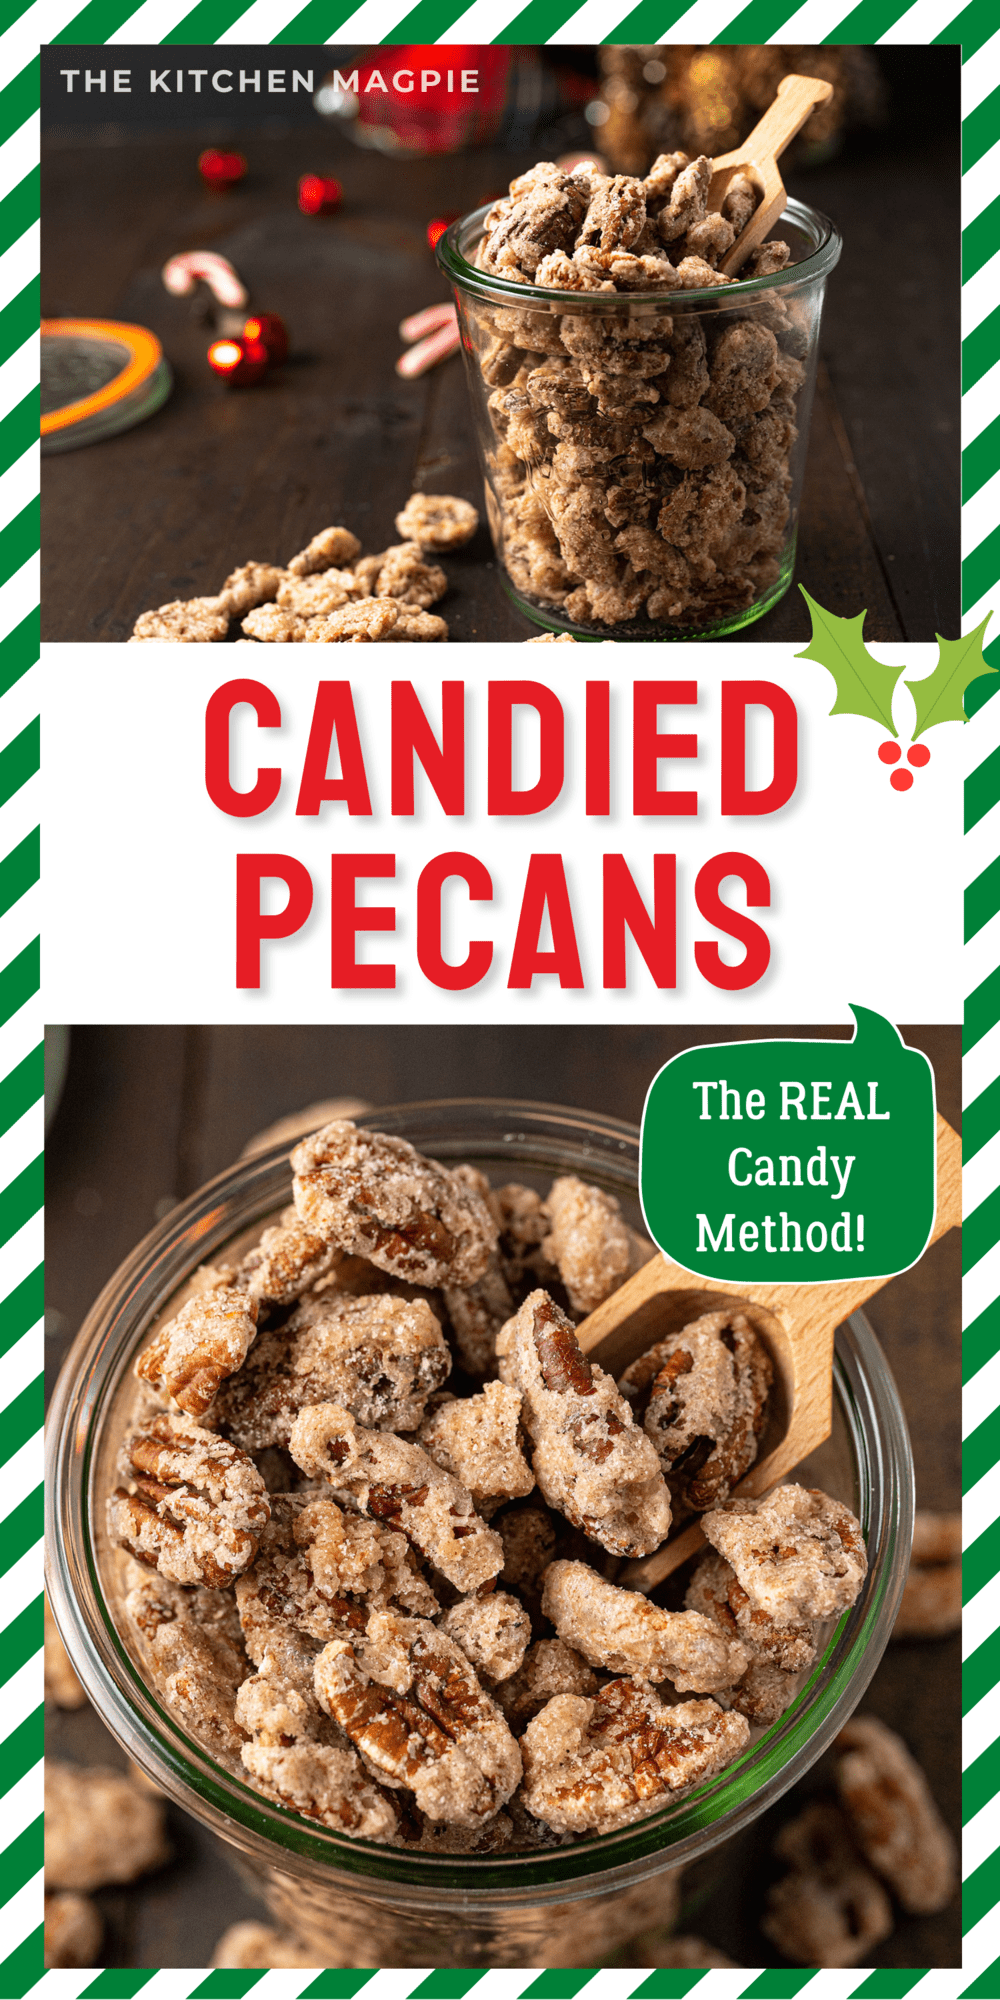 Real, true candied pecans using the soft ball candy making method to get the best, real candy-coated pecans you'll ever have! 